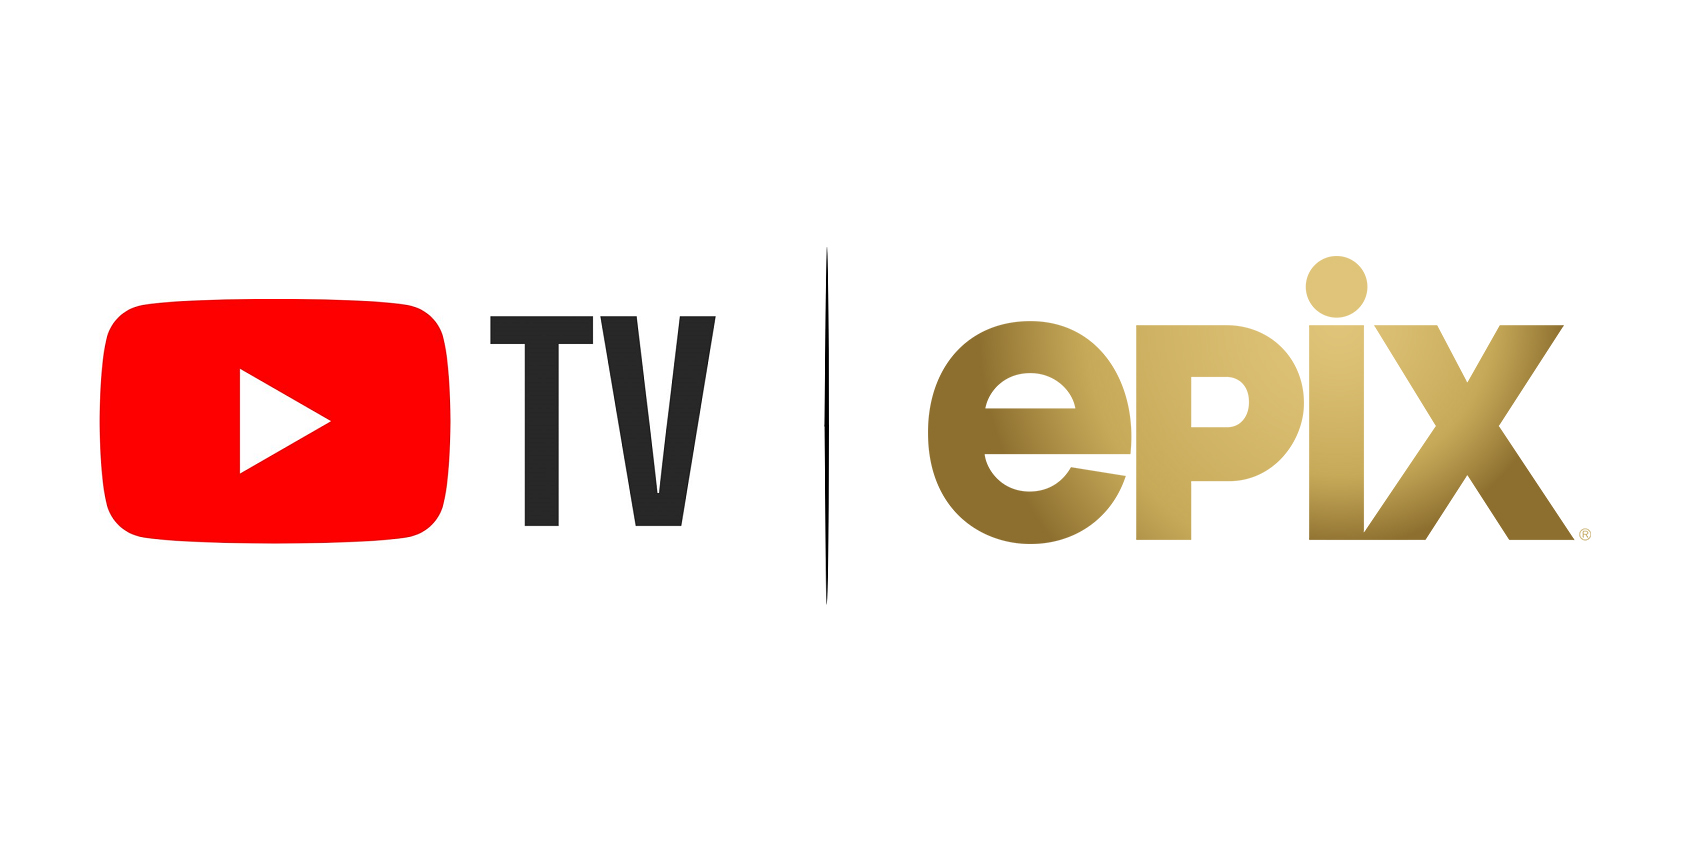 YouTube TV offers up free EPIX during COVID-19 pandemic